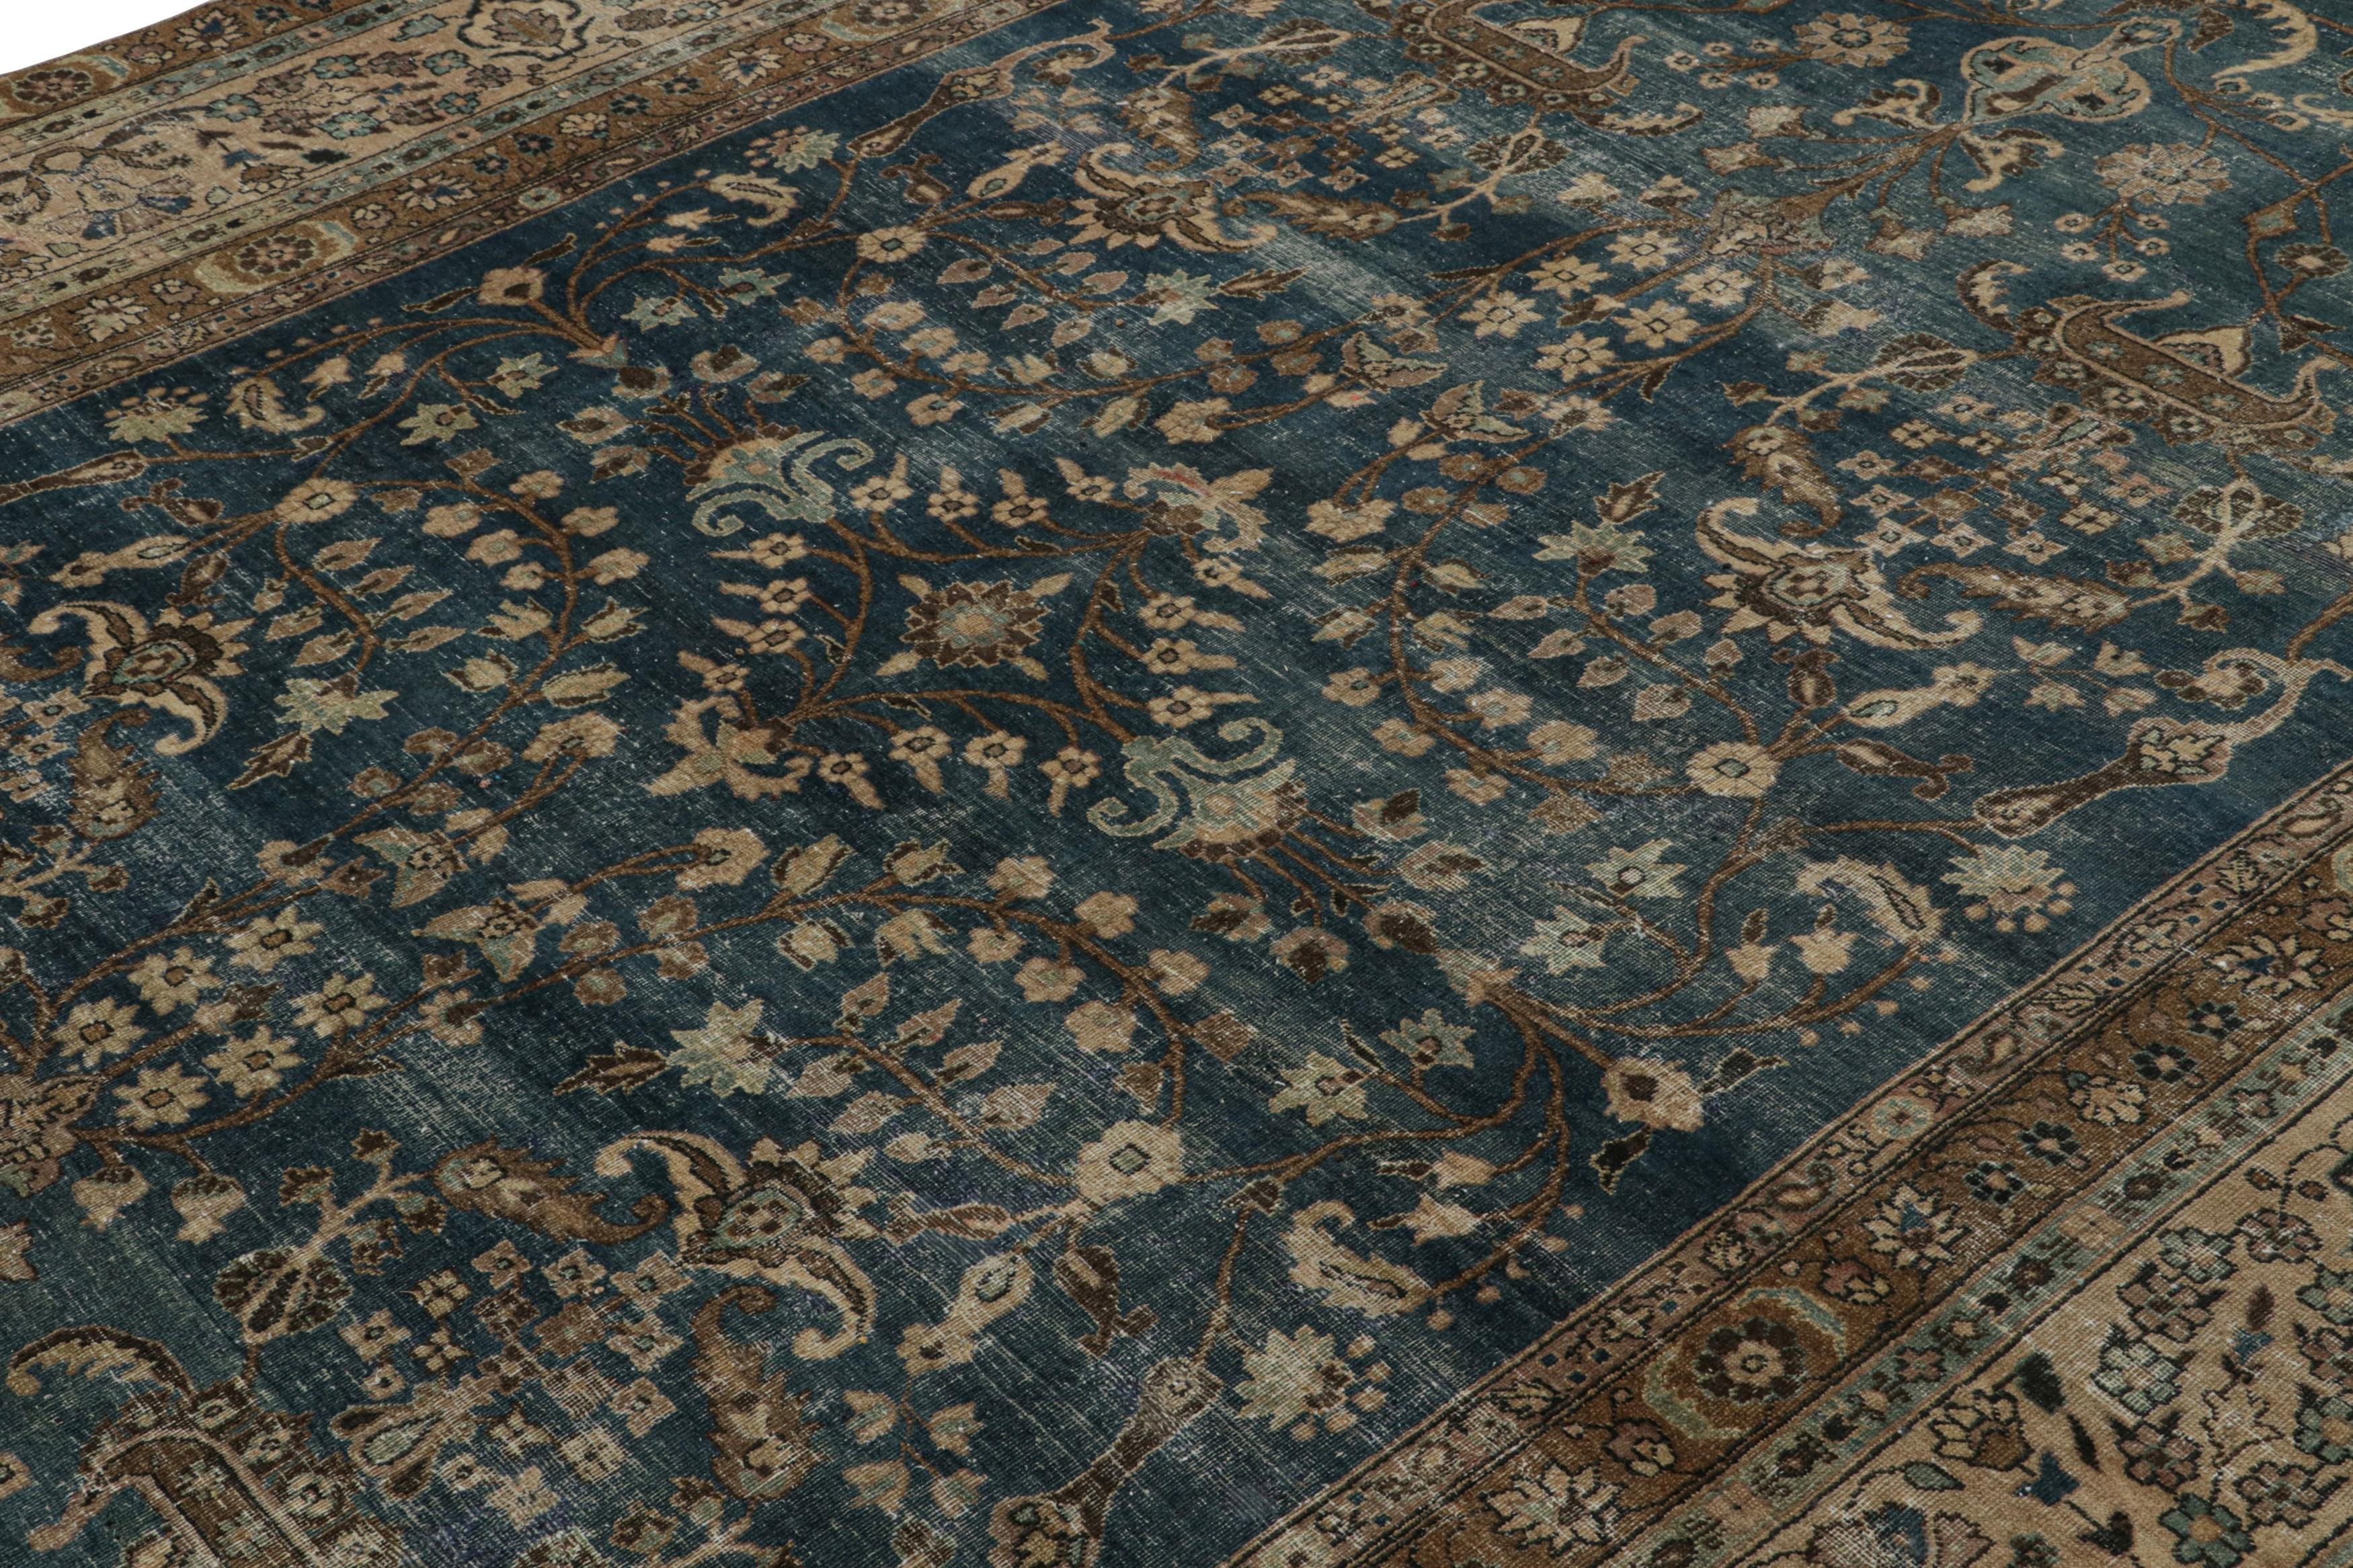 Antique Persian Doroksh Rug, with Floral Patterns, from Rug & Kilim In Good Condition For Sale In Long Island City, NY